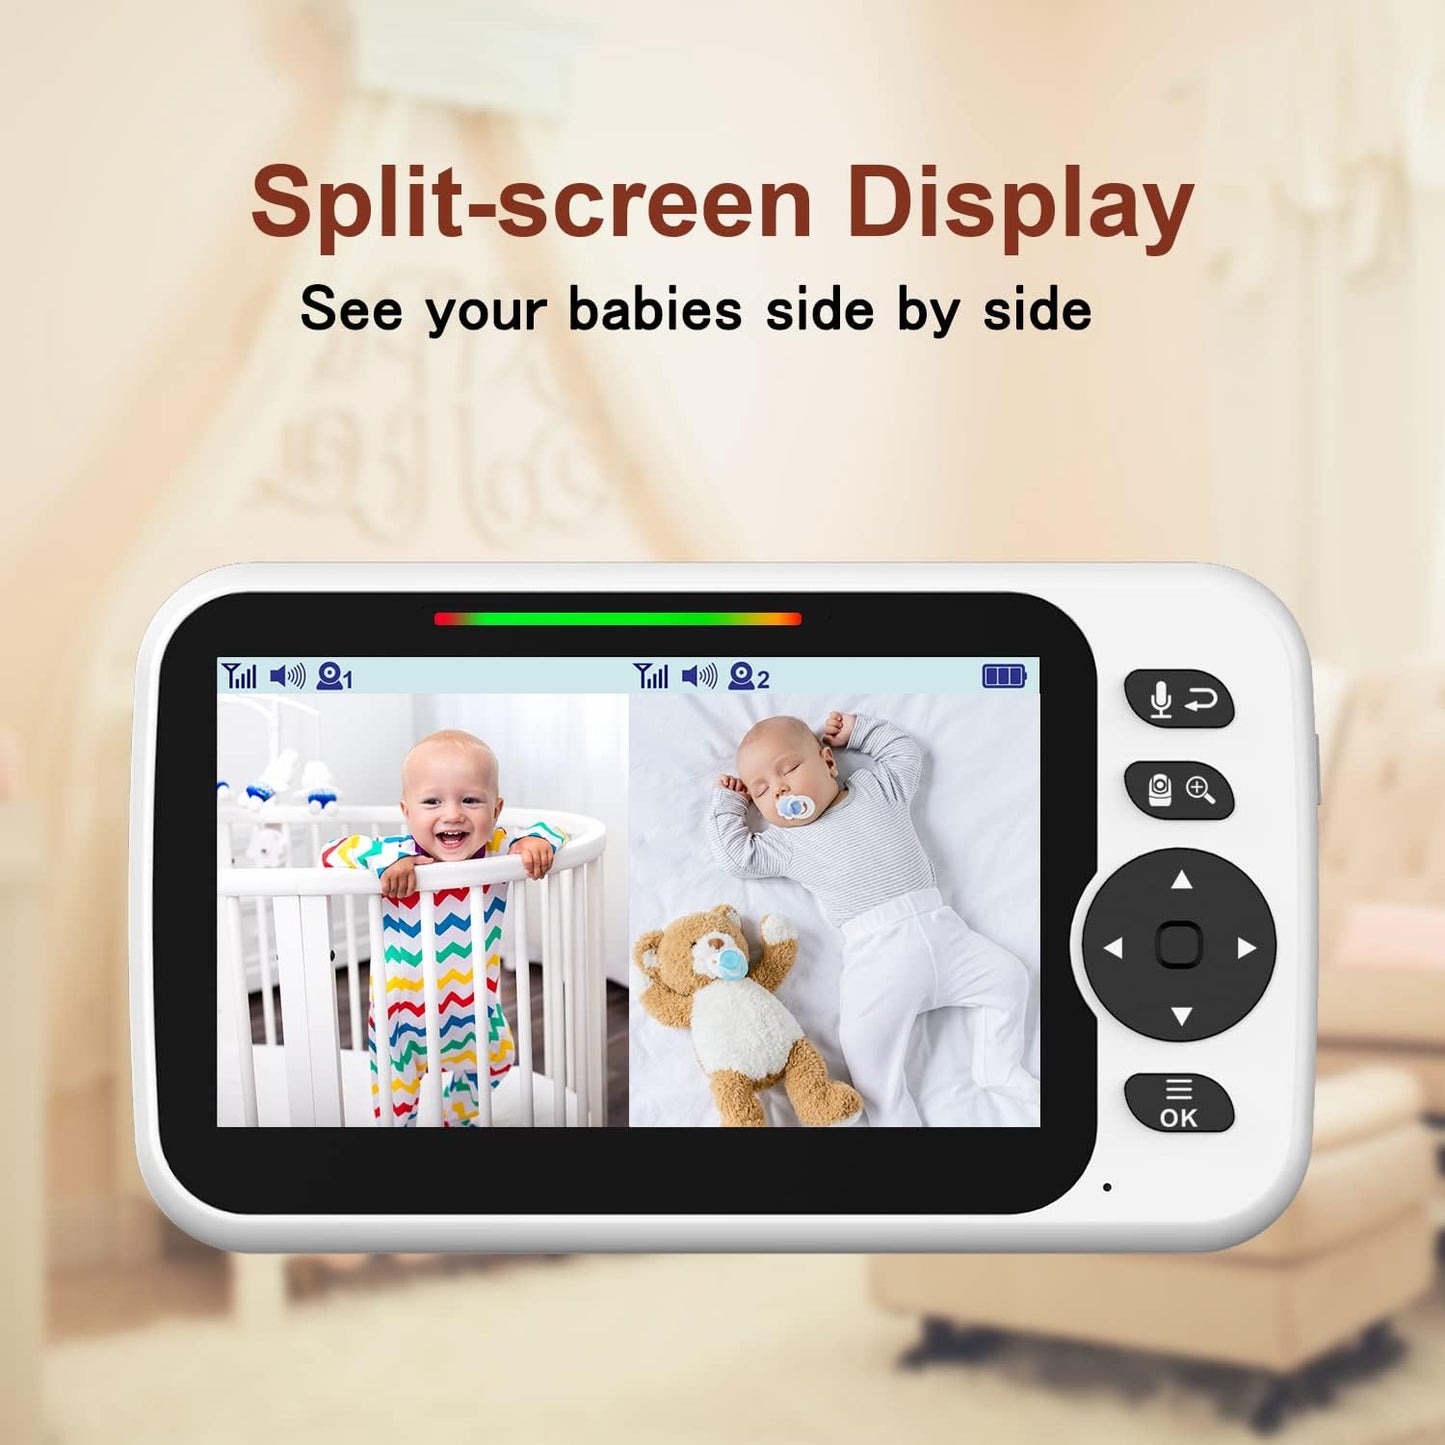 Blemil Upgrade Baby Monitor with 30-Hour Battery, 5" Large Split-Screen Video Baby Monitor with 2 Cameras and Audio, Remote Pan/Tilt/Zoom, Two-Way Talk, Room Temperature, Auto Night Vision (B